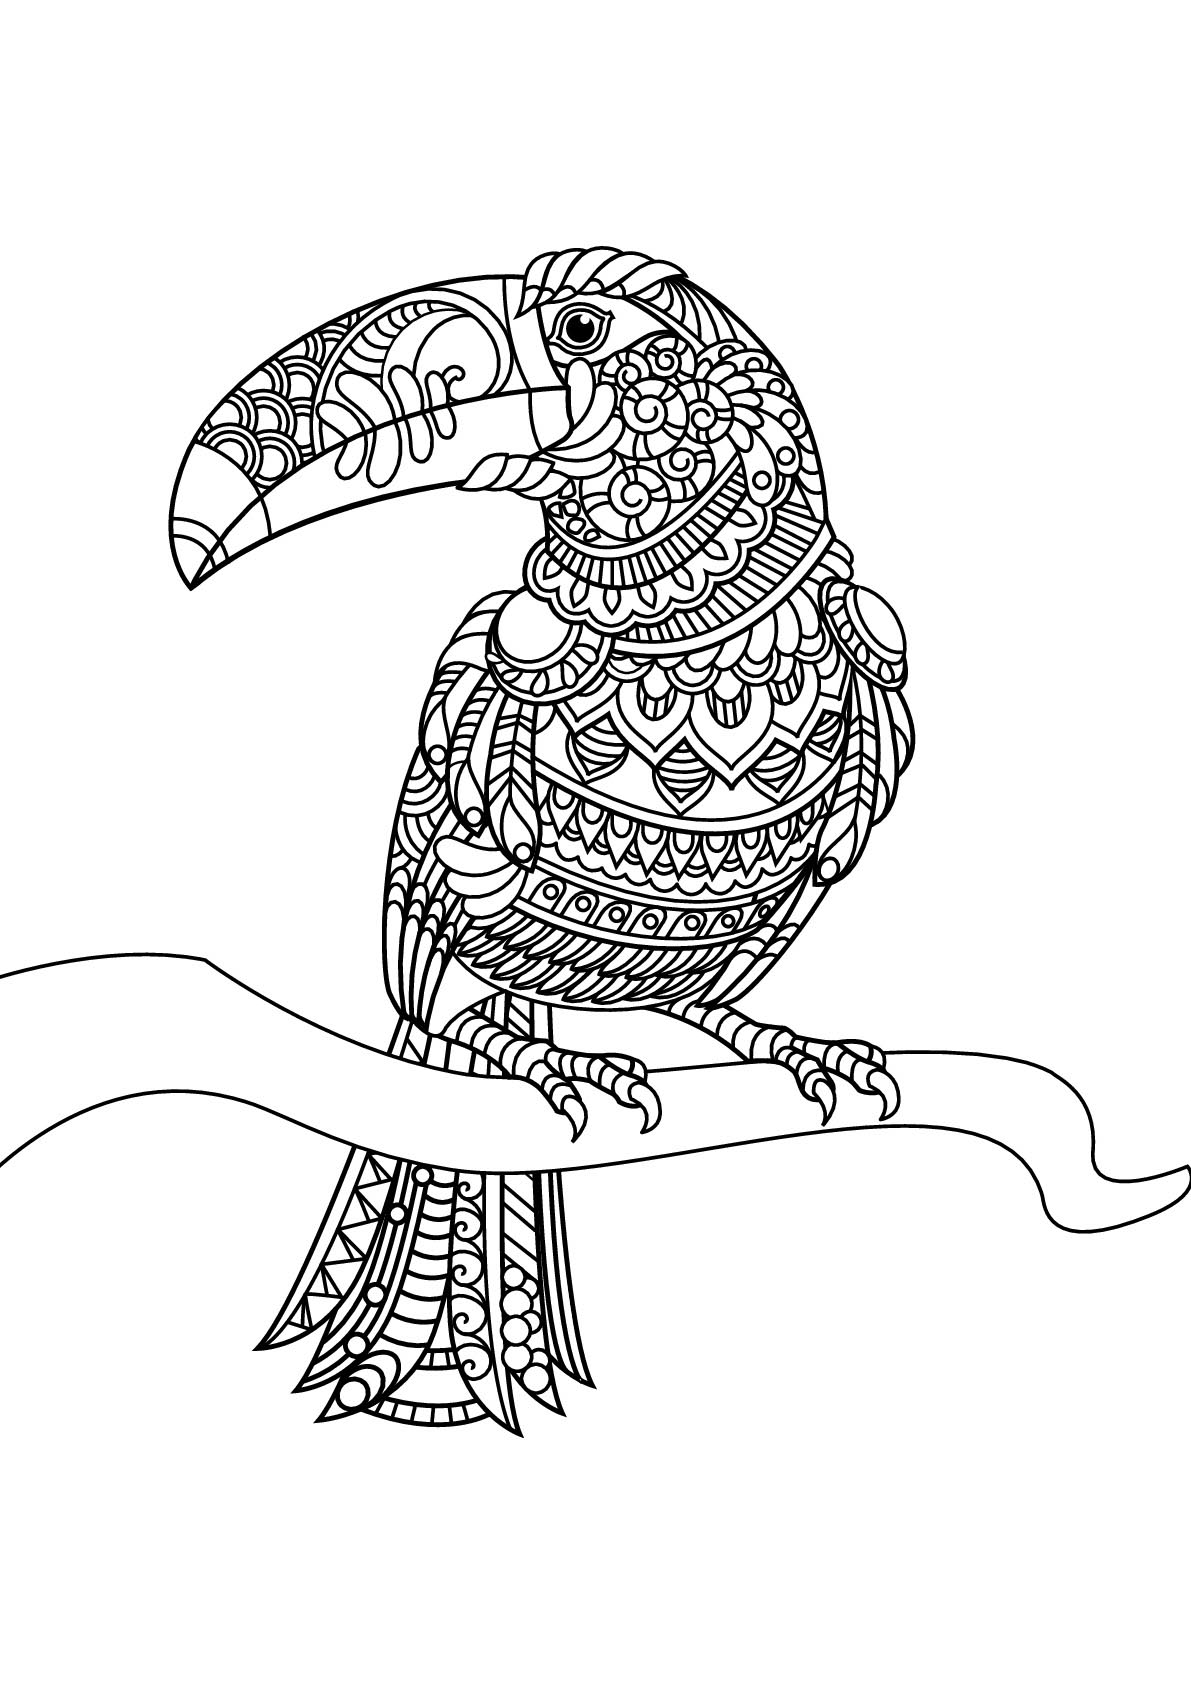 coloring book ~ Birdng Pages For Kids Cute Free To Print Printable Robin  Tremendous Bird Coloring Pages For Kids Image Ideas. Cute Bird Coloring  Pages For Kids To Print. Coloring Pages To